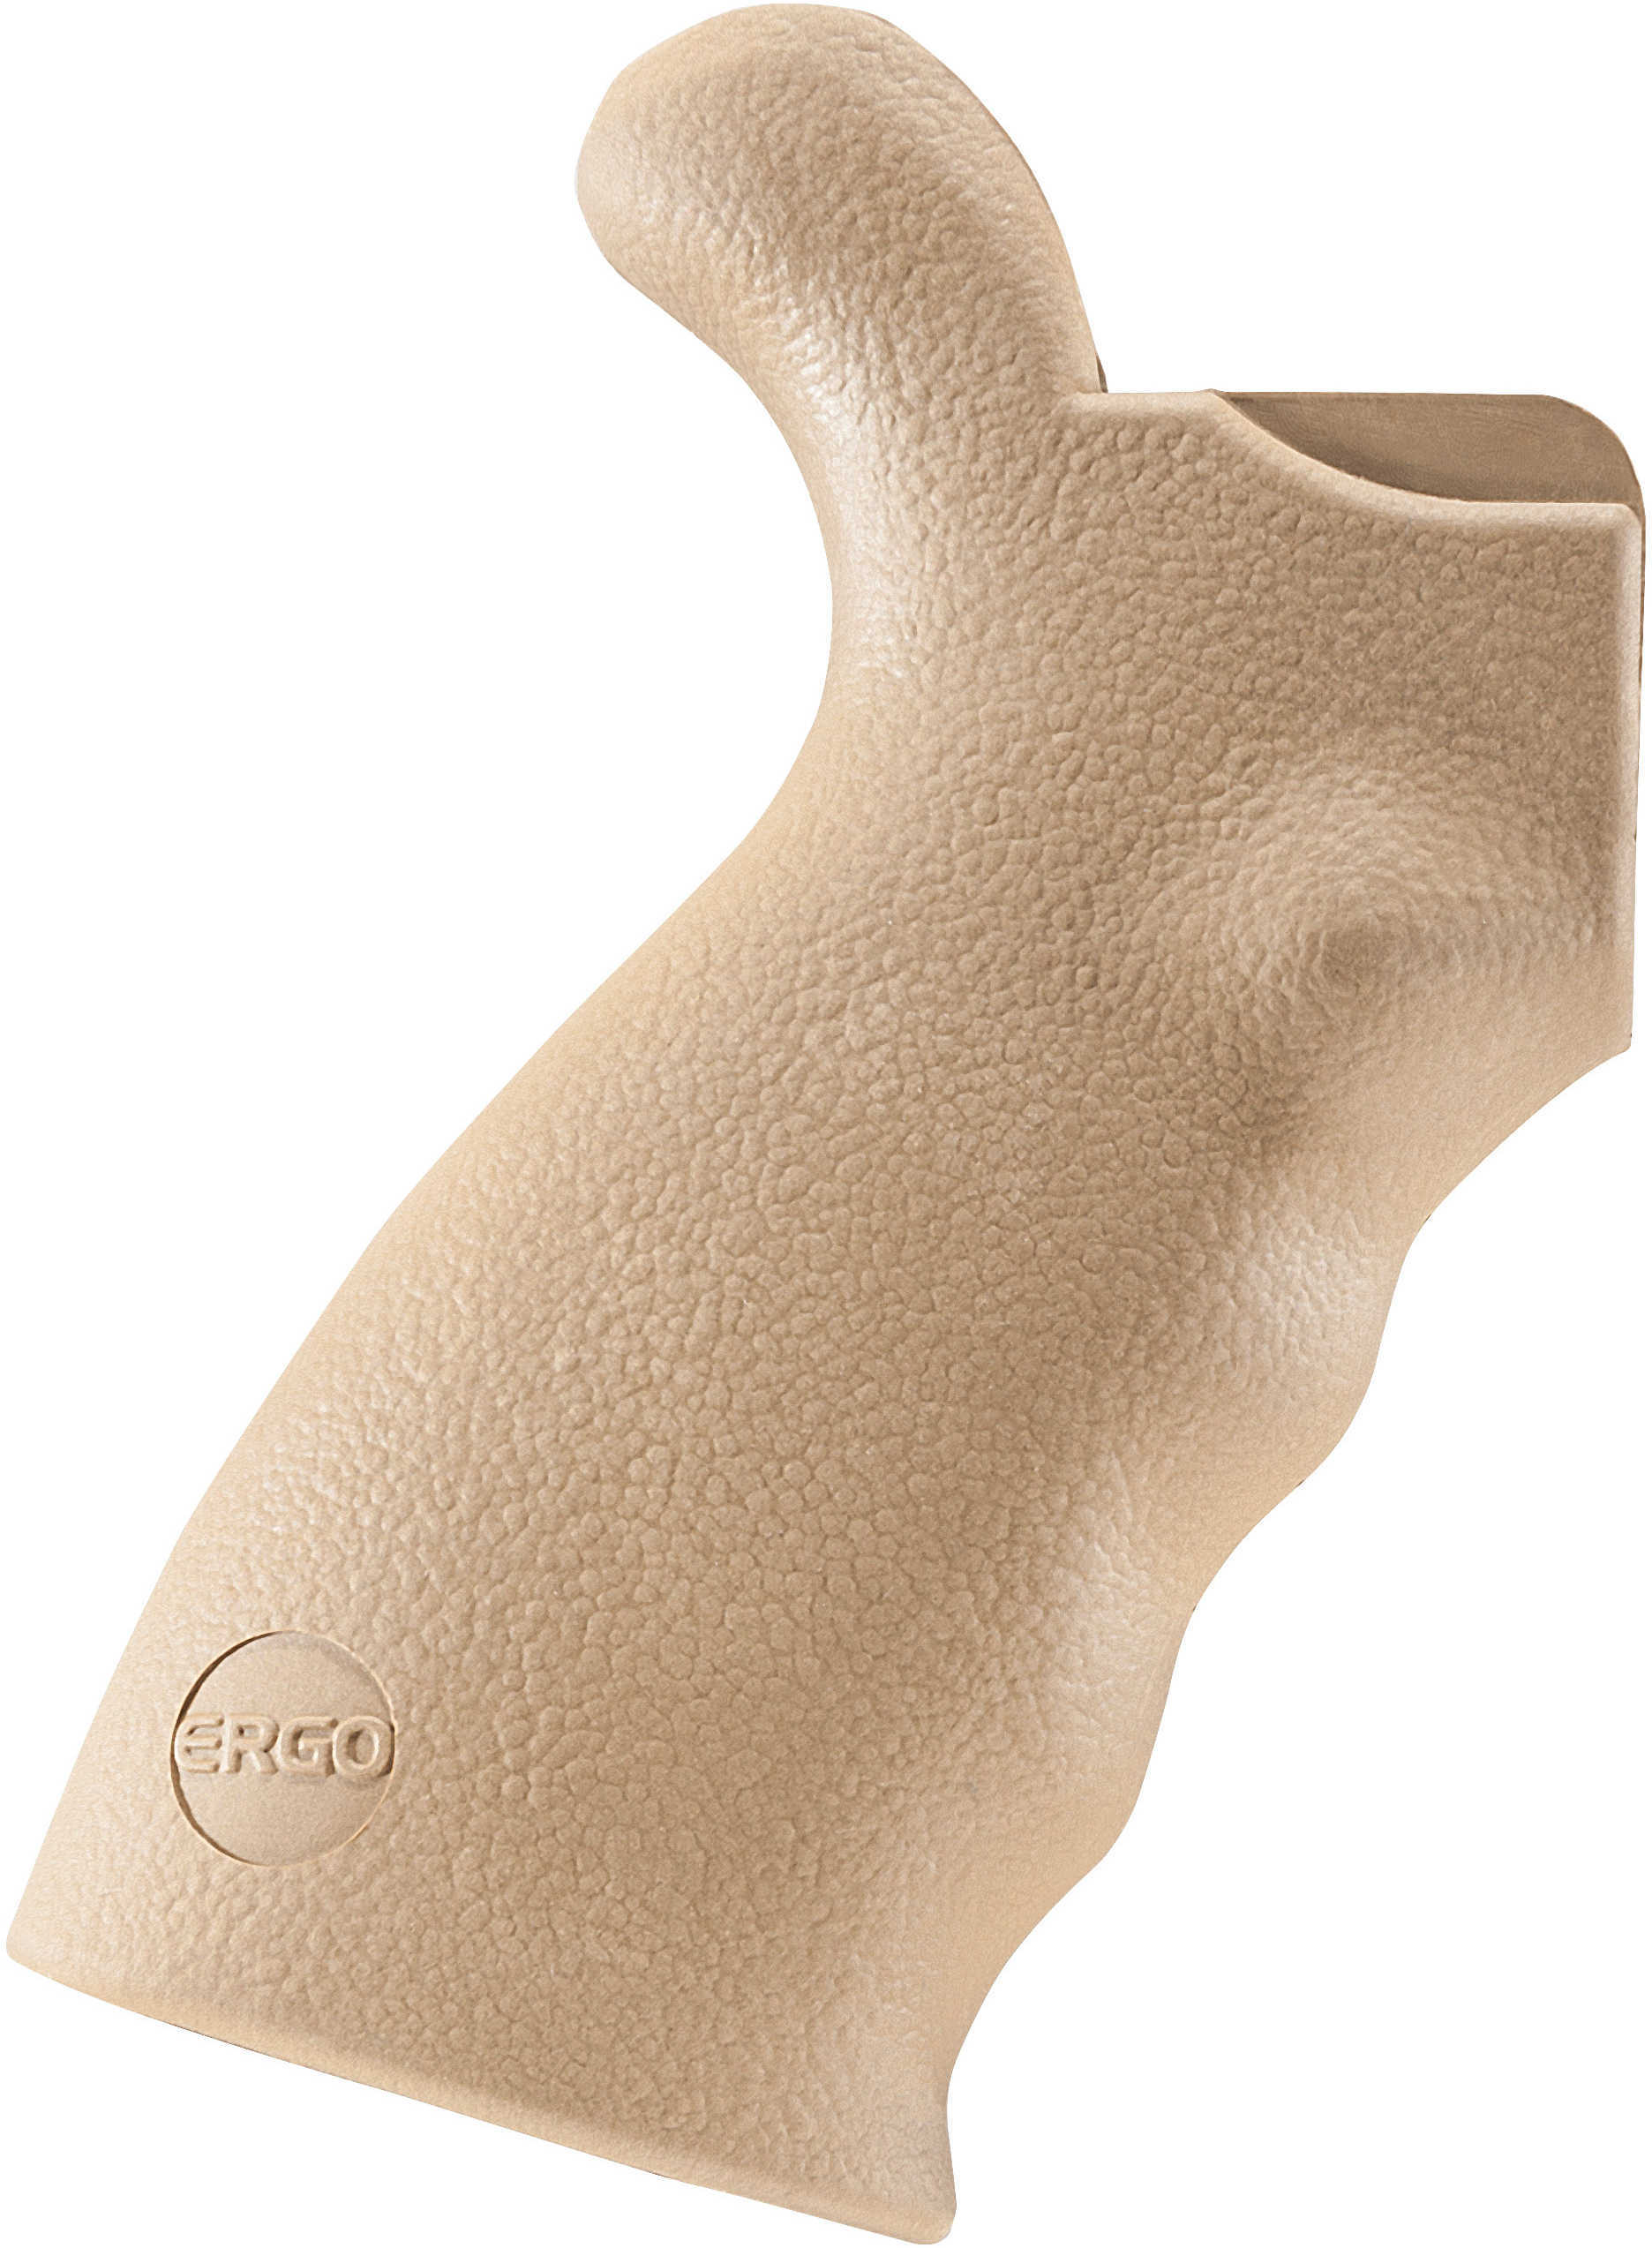 Ergo Grip Sure Rubber FN SCAR Coyote Brown 4141-CB-img-1